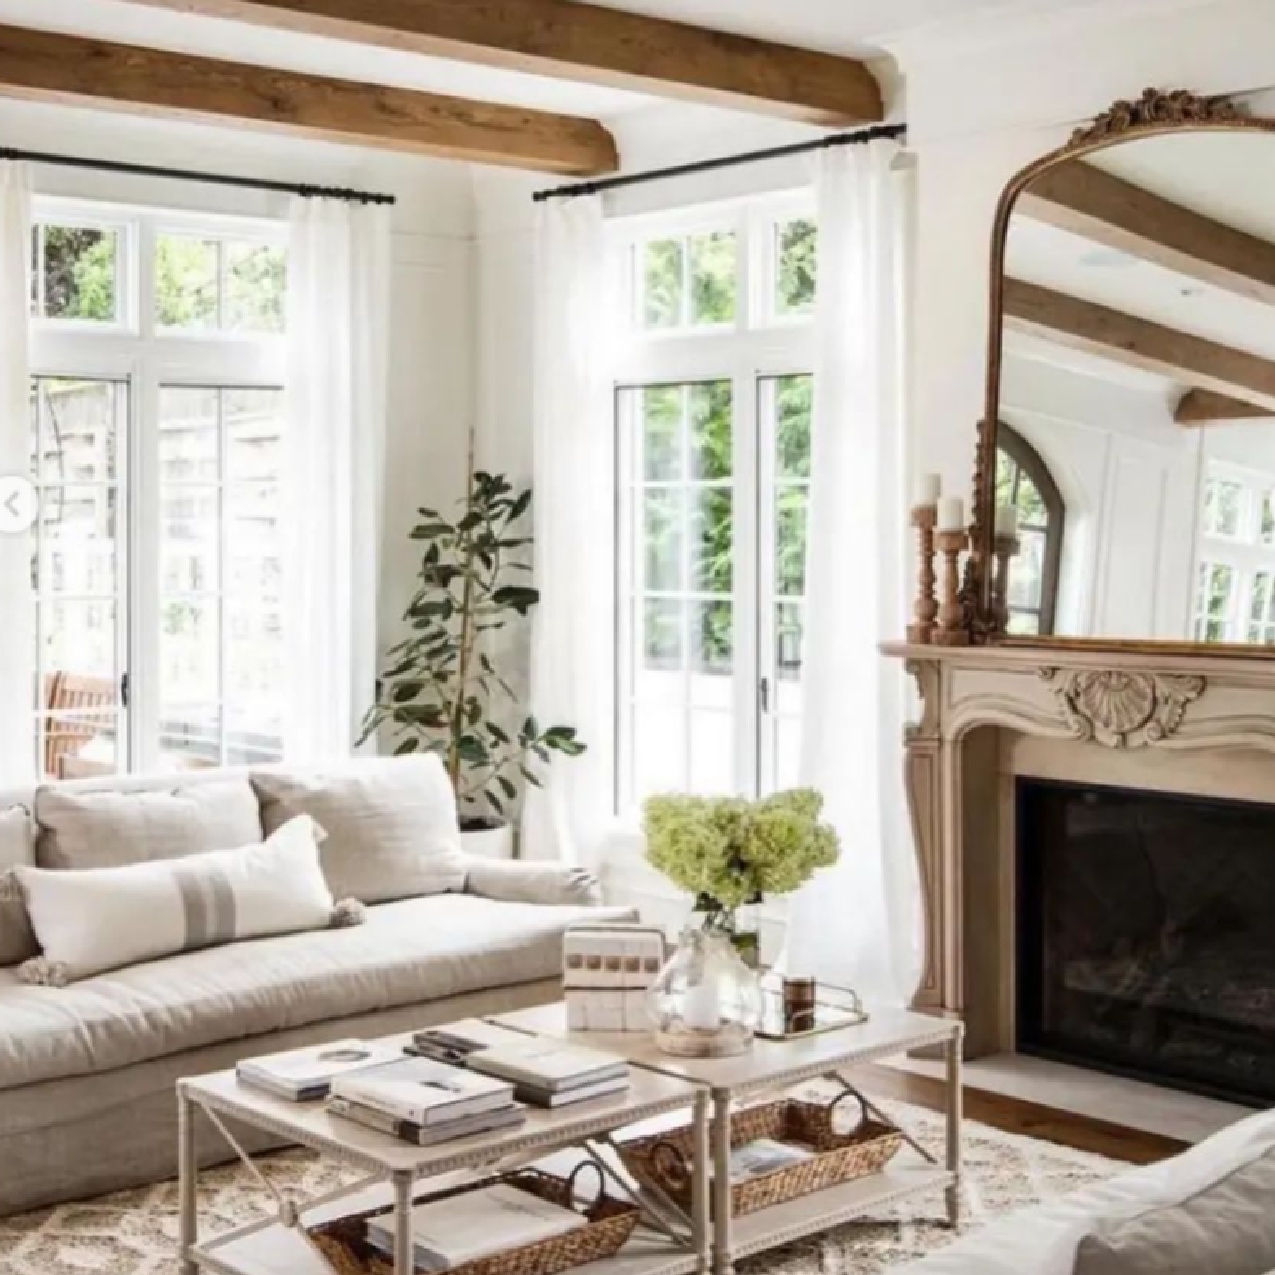 Neutral living room in beautiful French country home with interior design by Jenny Martin Design. #frenchcountryhome #livingrooms